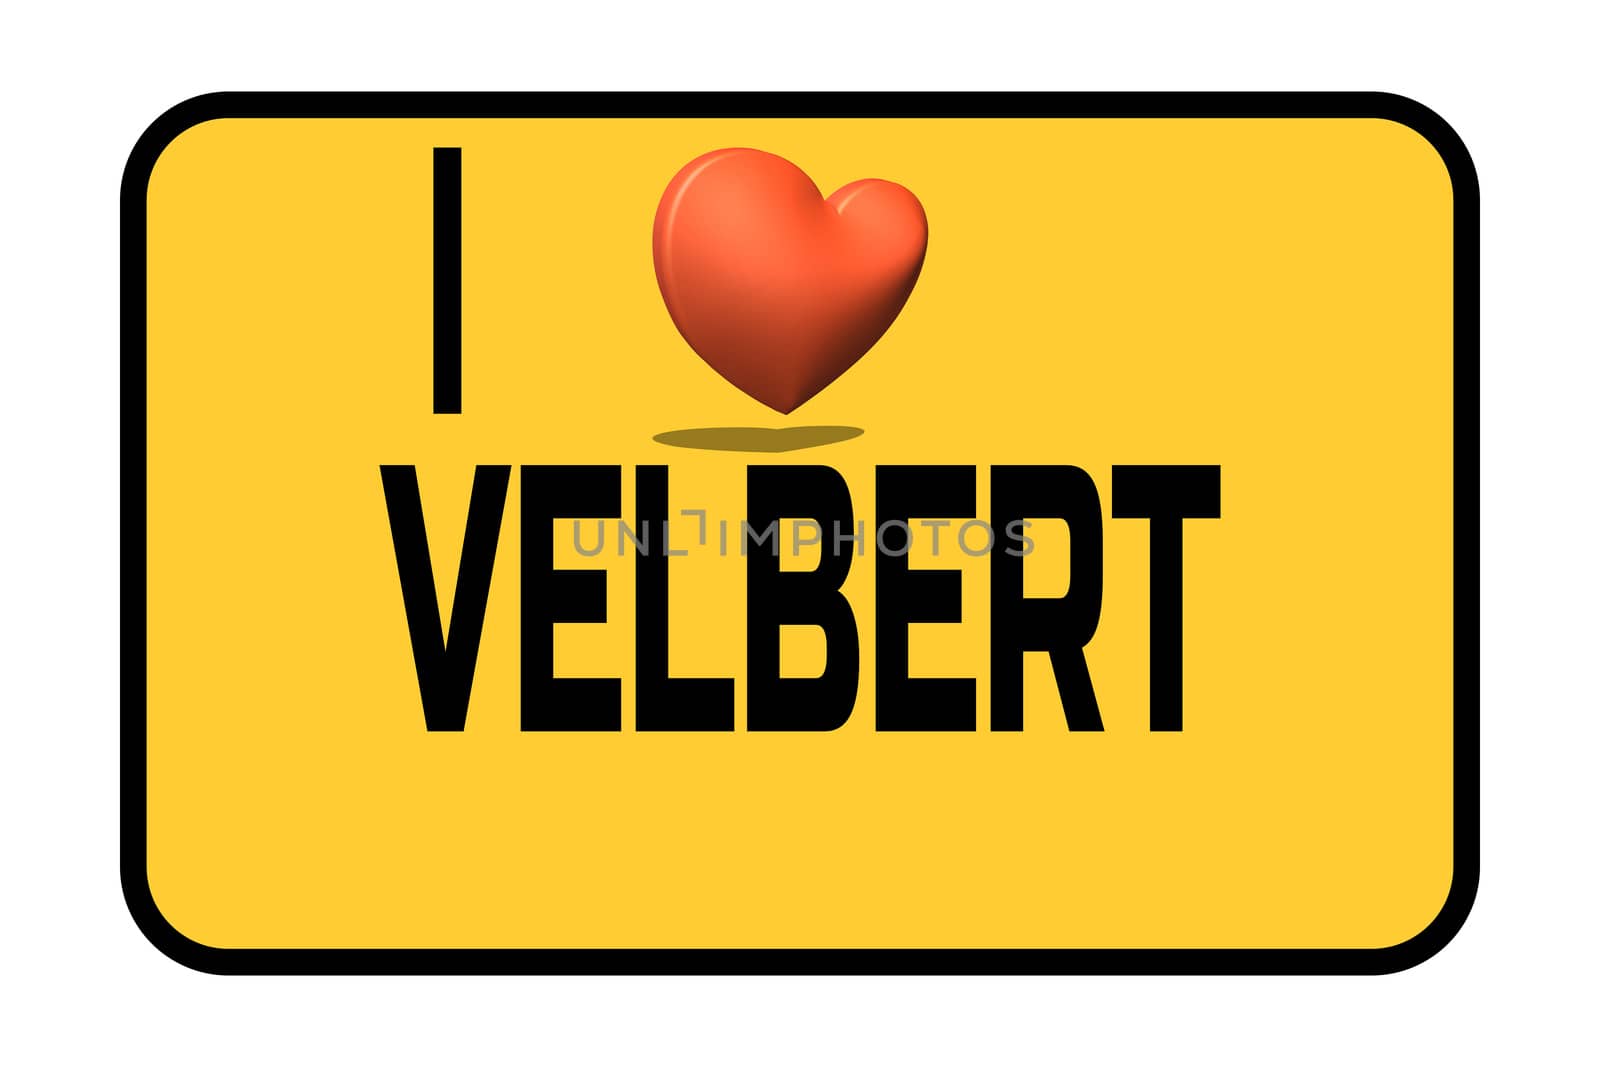 City entrance road sign with caption in english - I love my city  Velbert and heart symbol